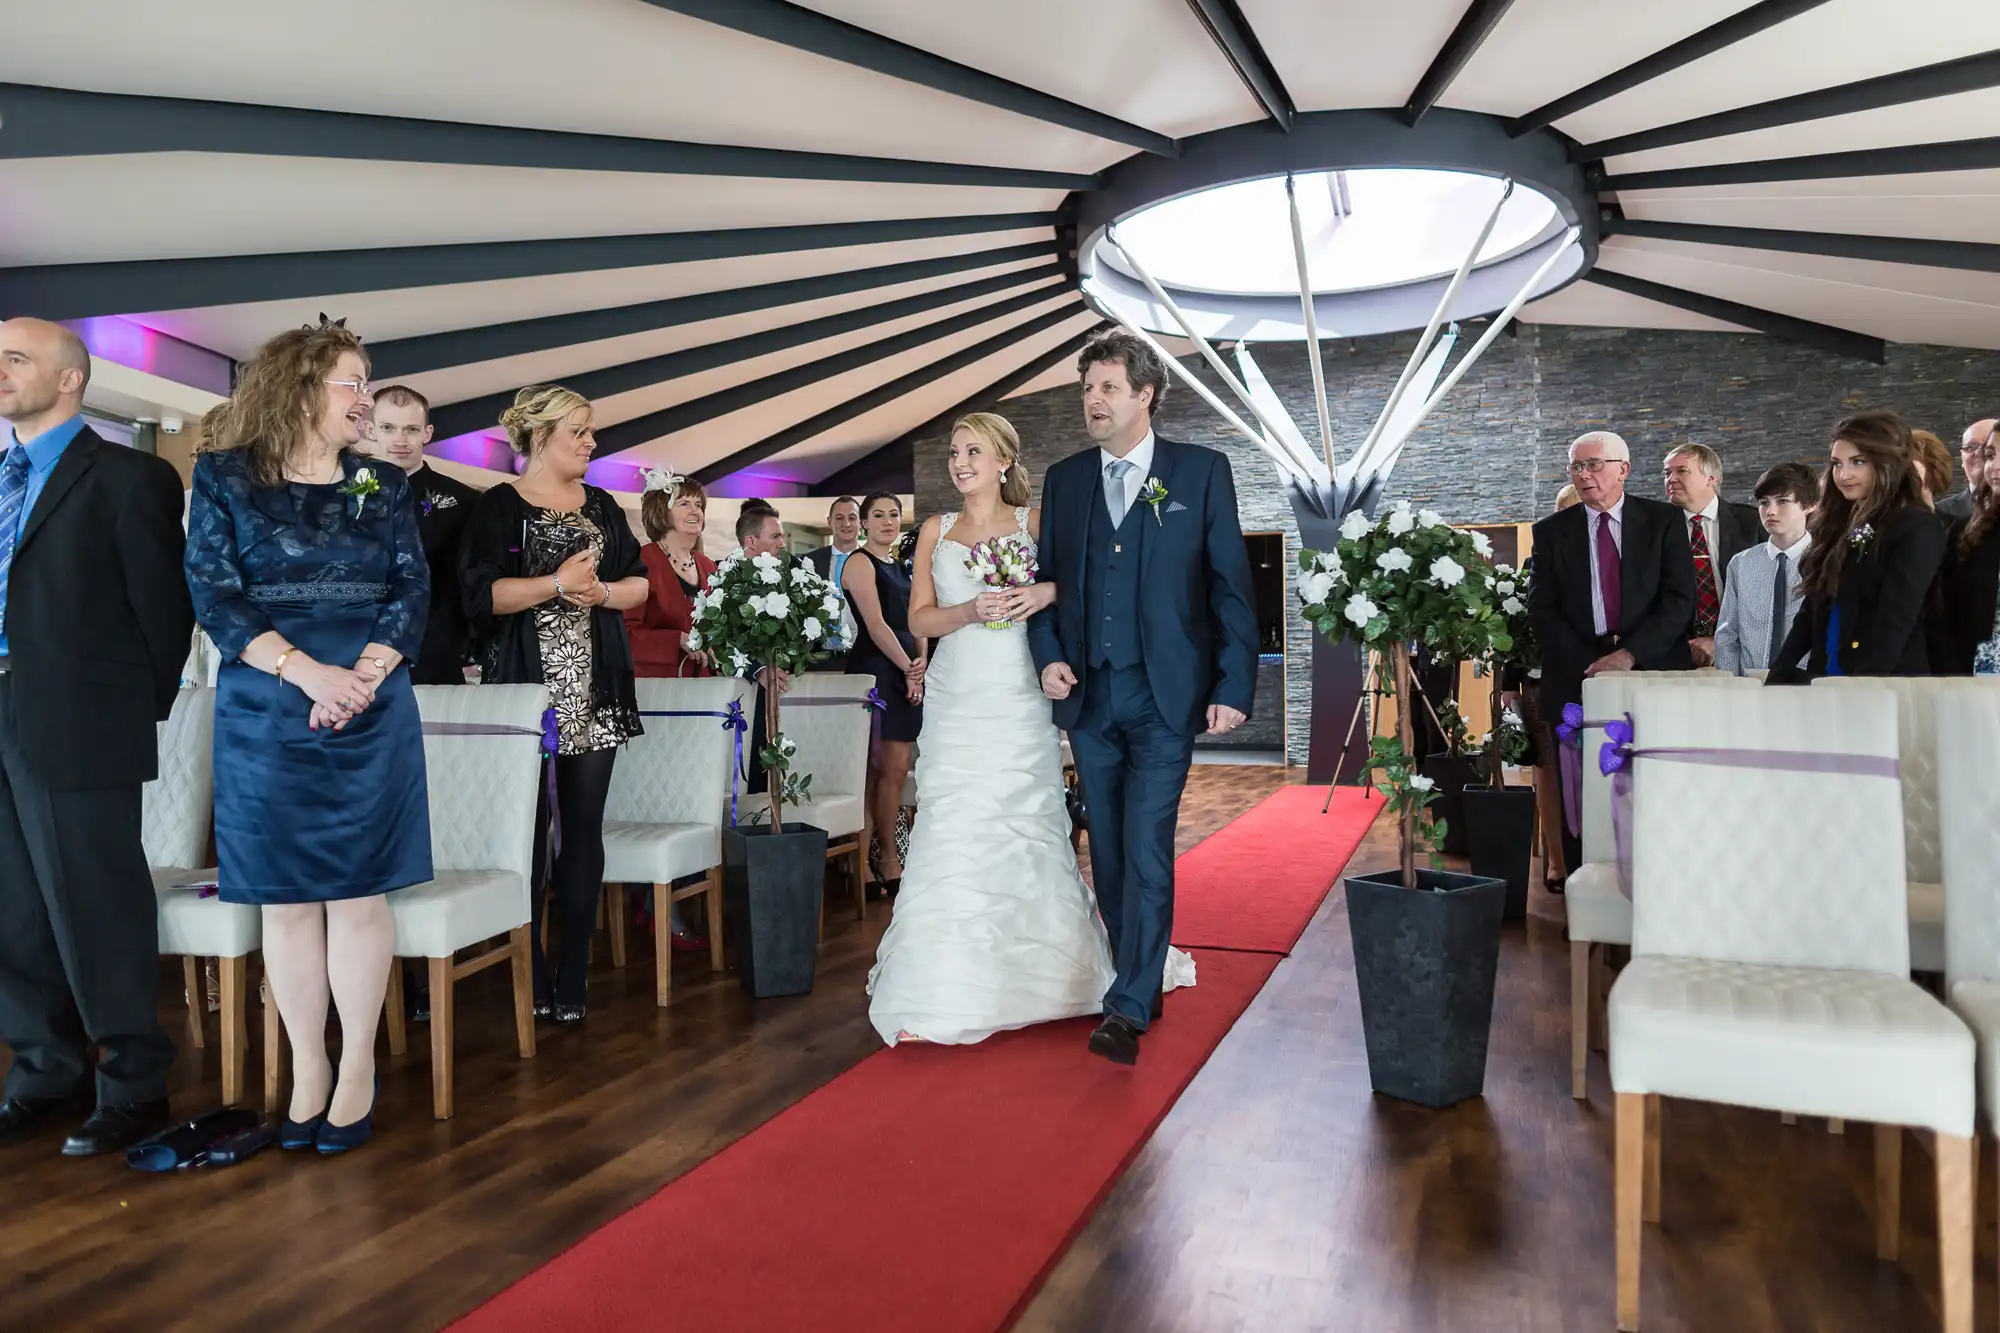 A bride and groom walking down the aisle after their wedding ceremony, surrounded by guests in a modern room with a curved ceiling.